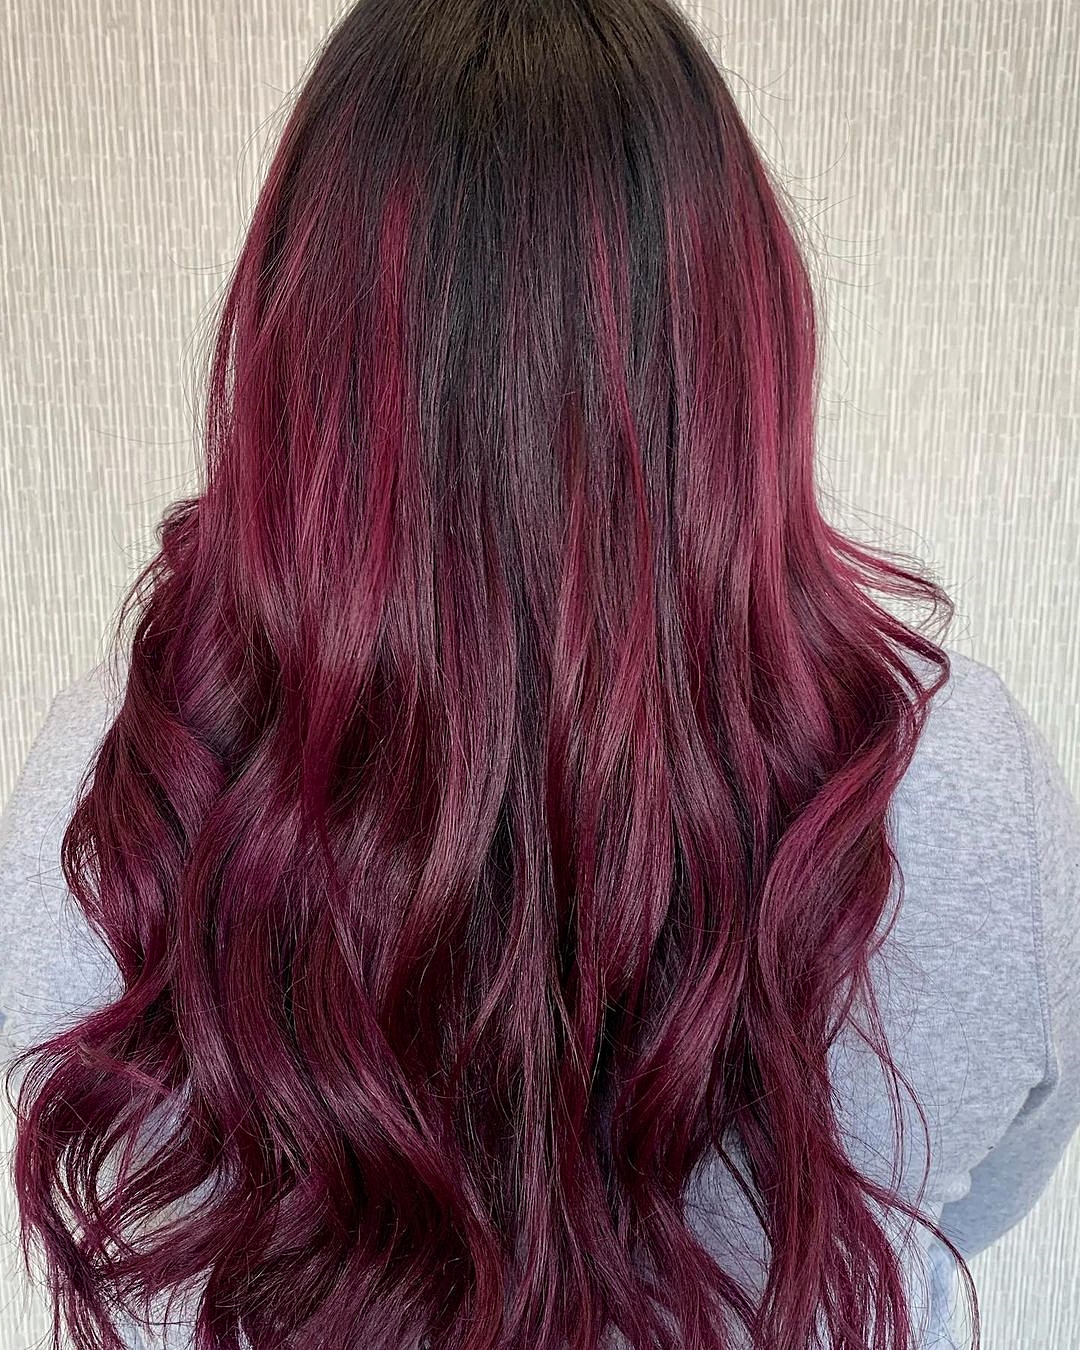 Burgundy Hair: This is The Trend Hair Color for Fall 2021